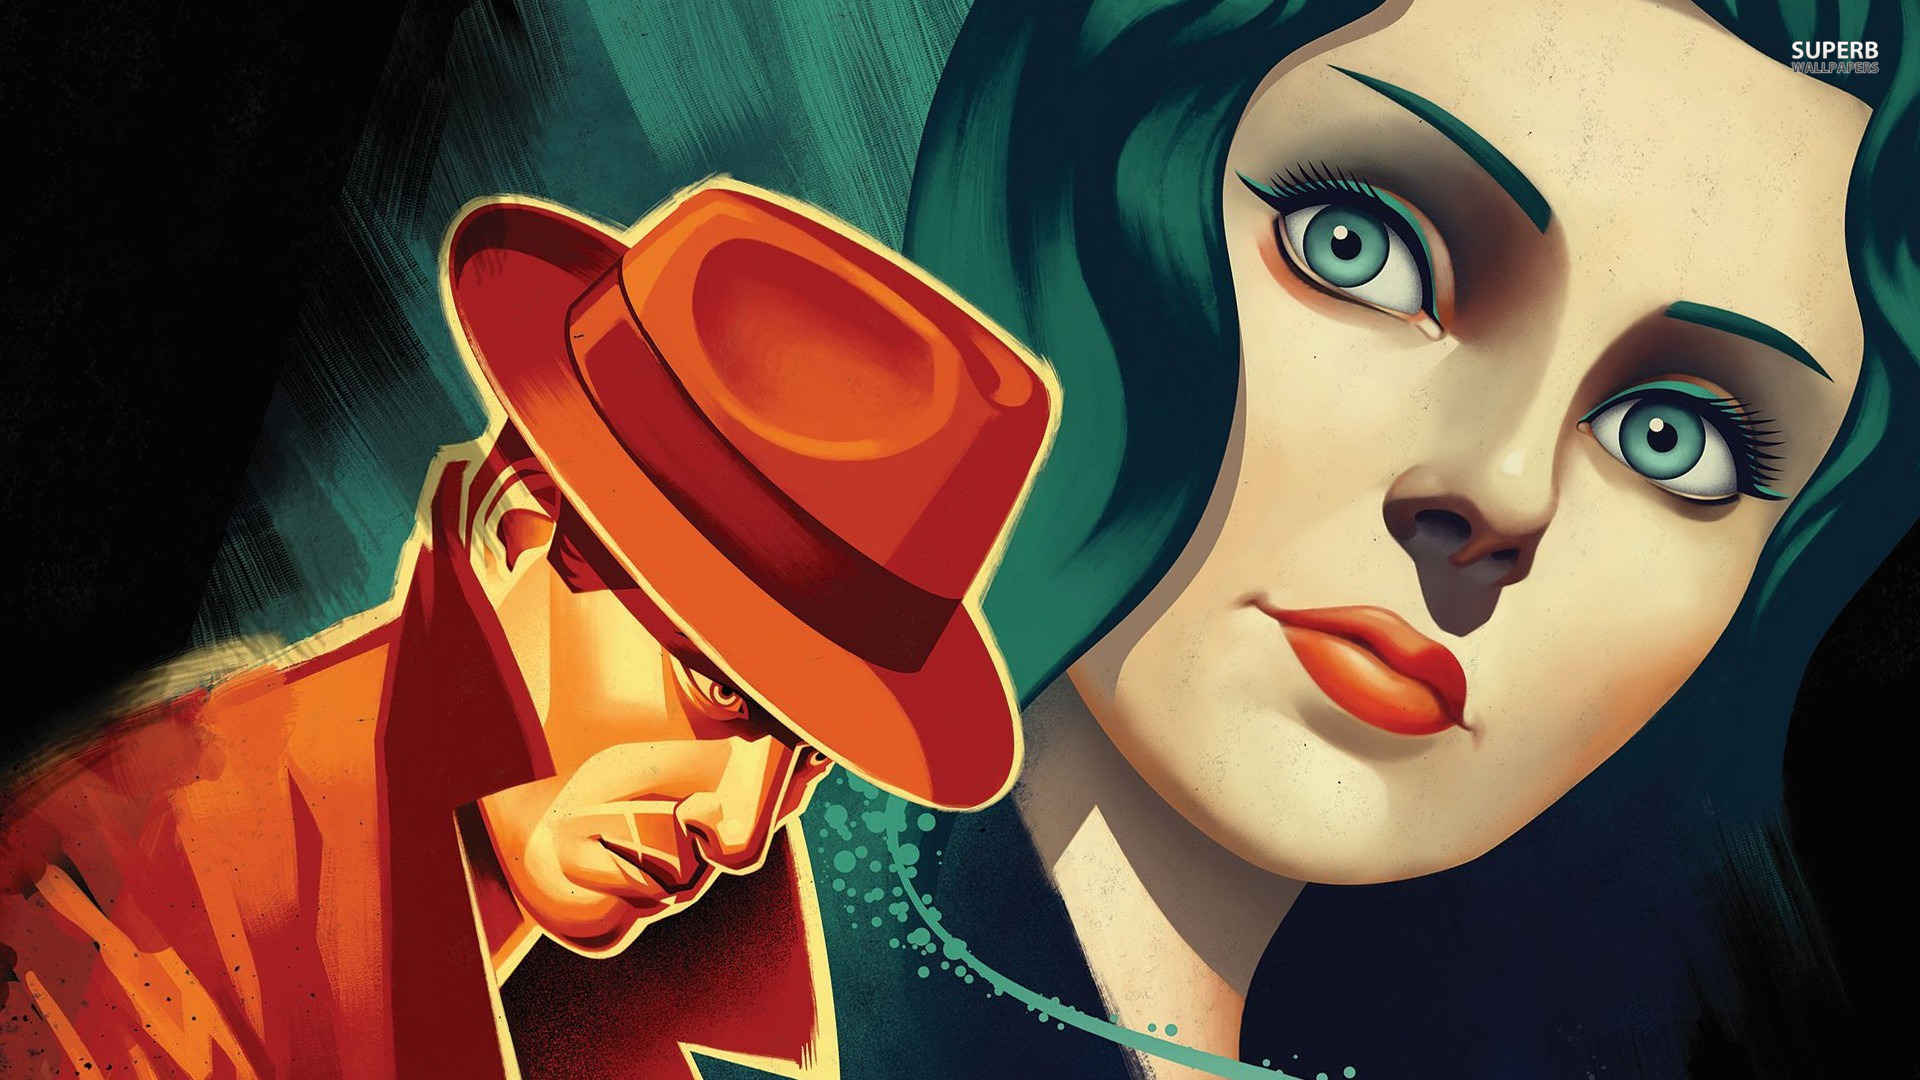 BioShock Infinite: Burial At Sea Backgrounds on Wallpapers Vista